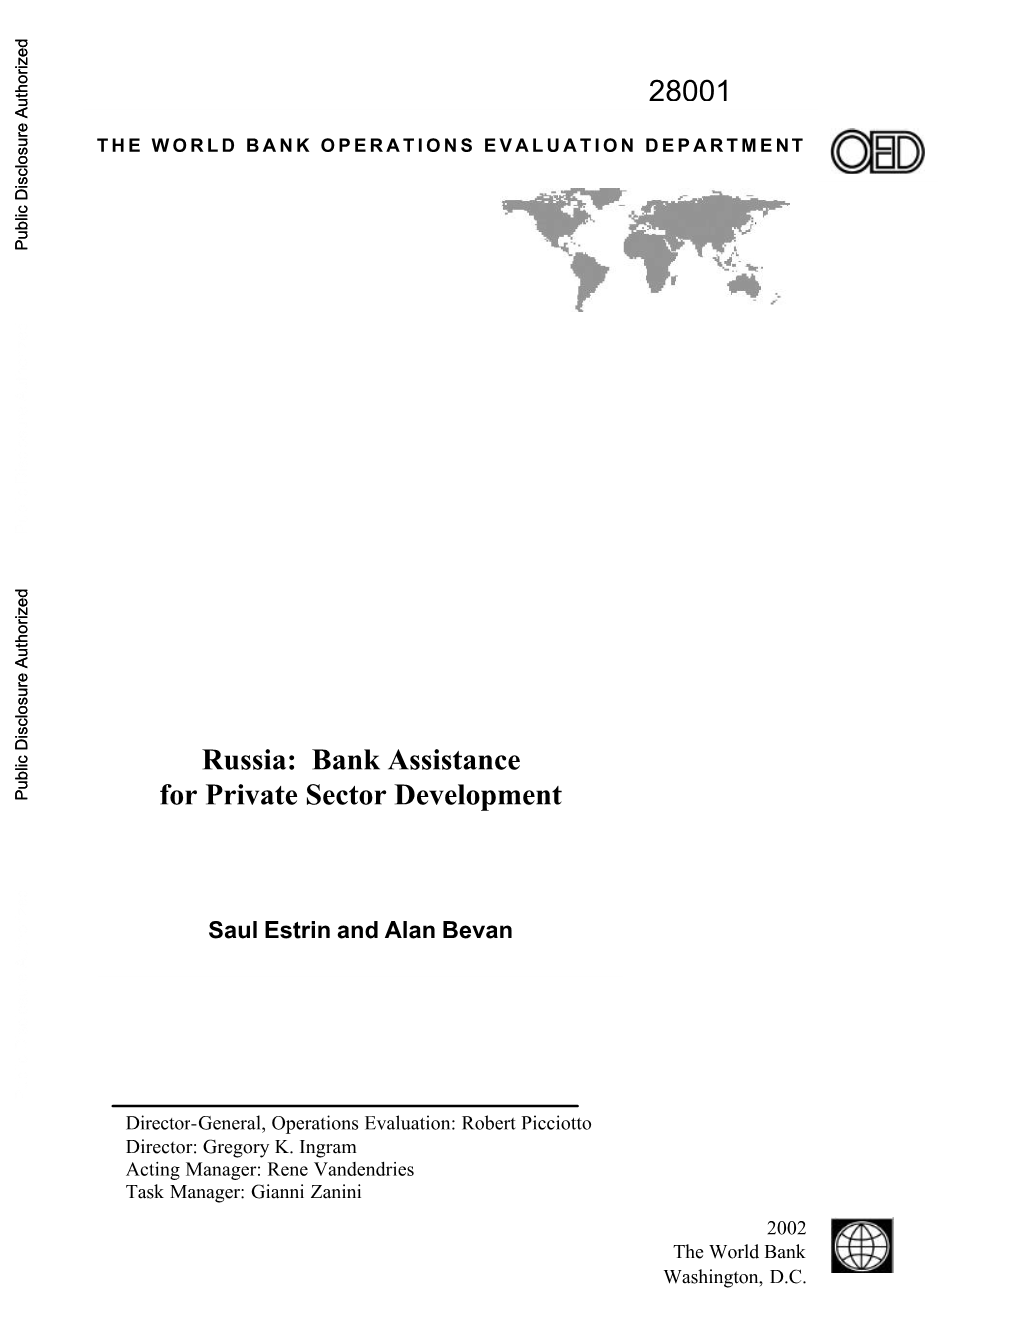 Russia: Bank Assistance for Private Sector